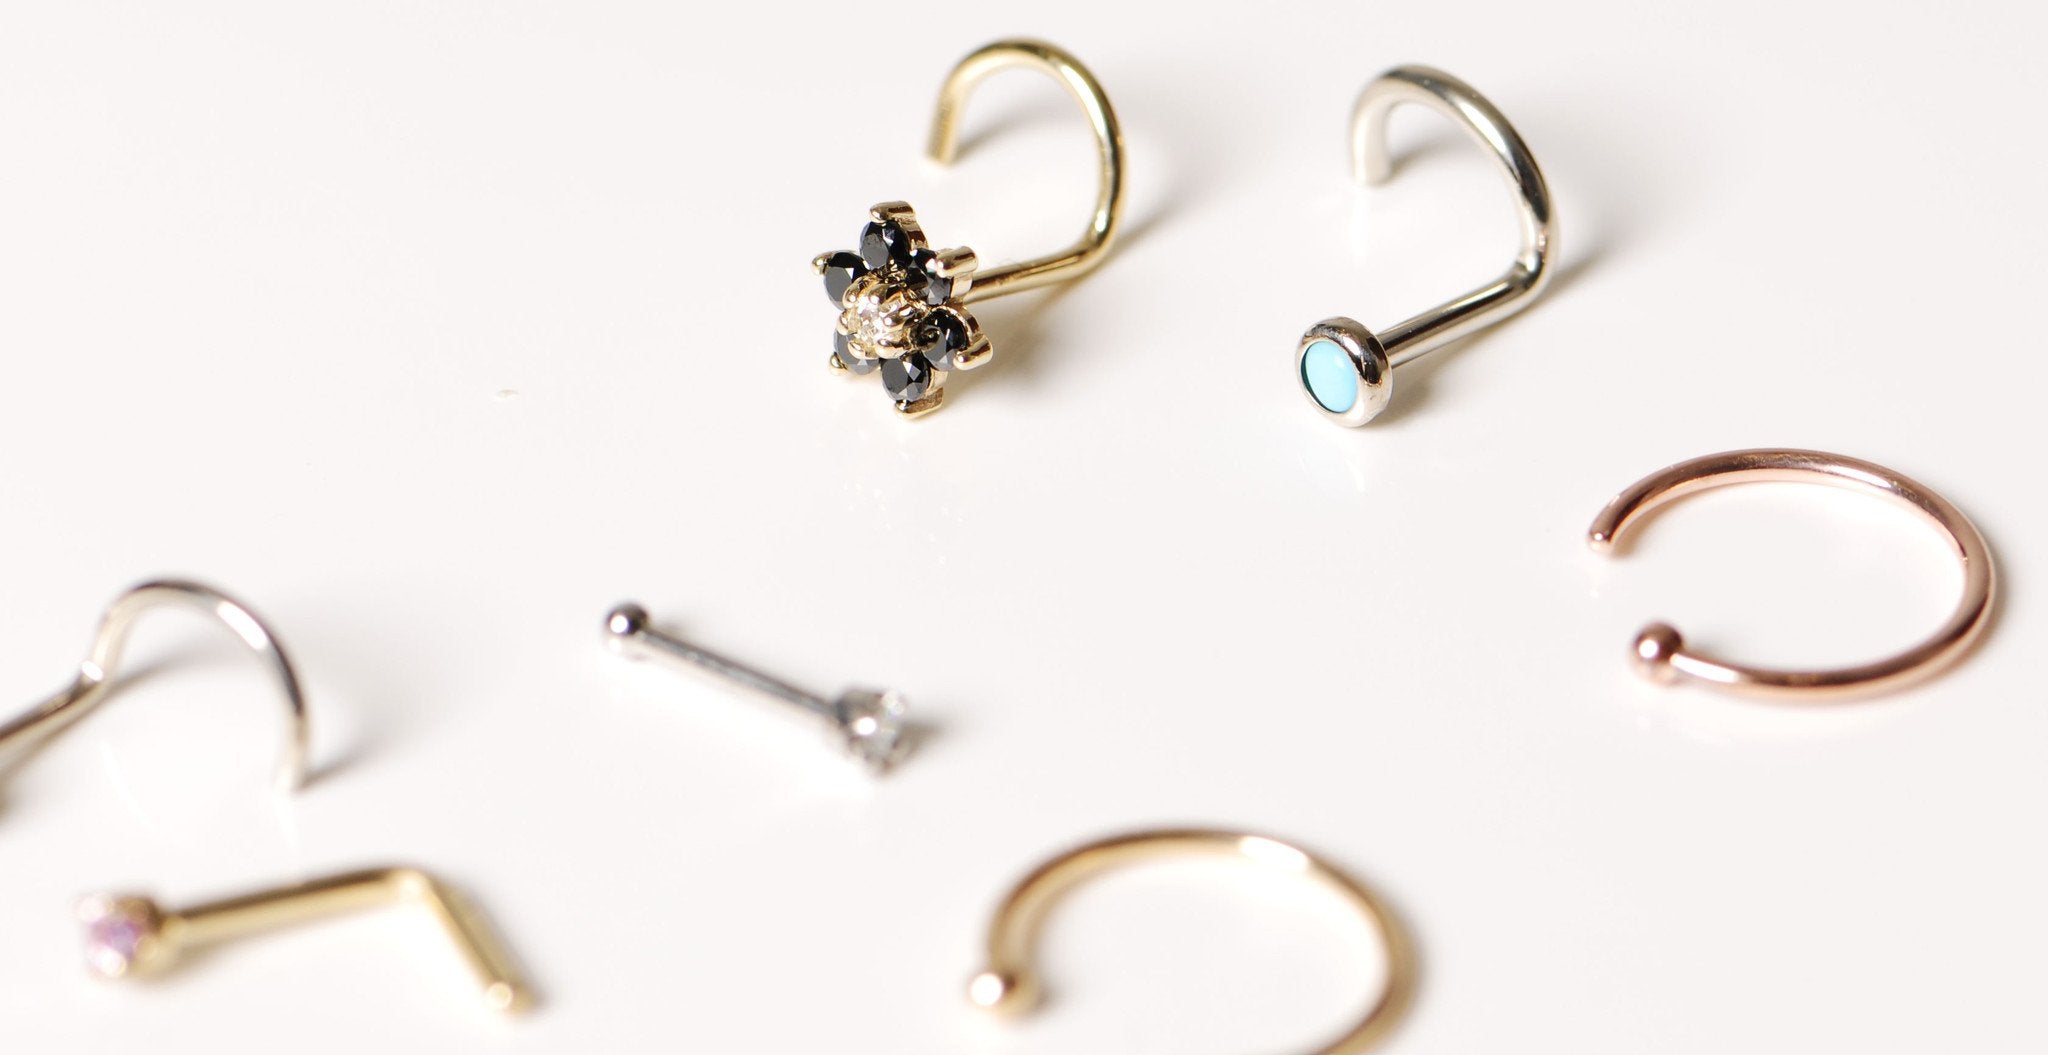 The Secret Behind Our Handcrafted 14KT Gold Nose Rings